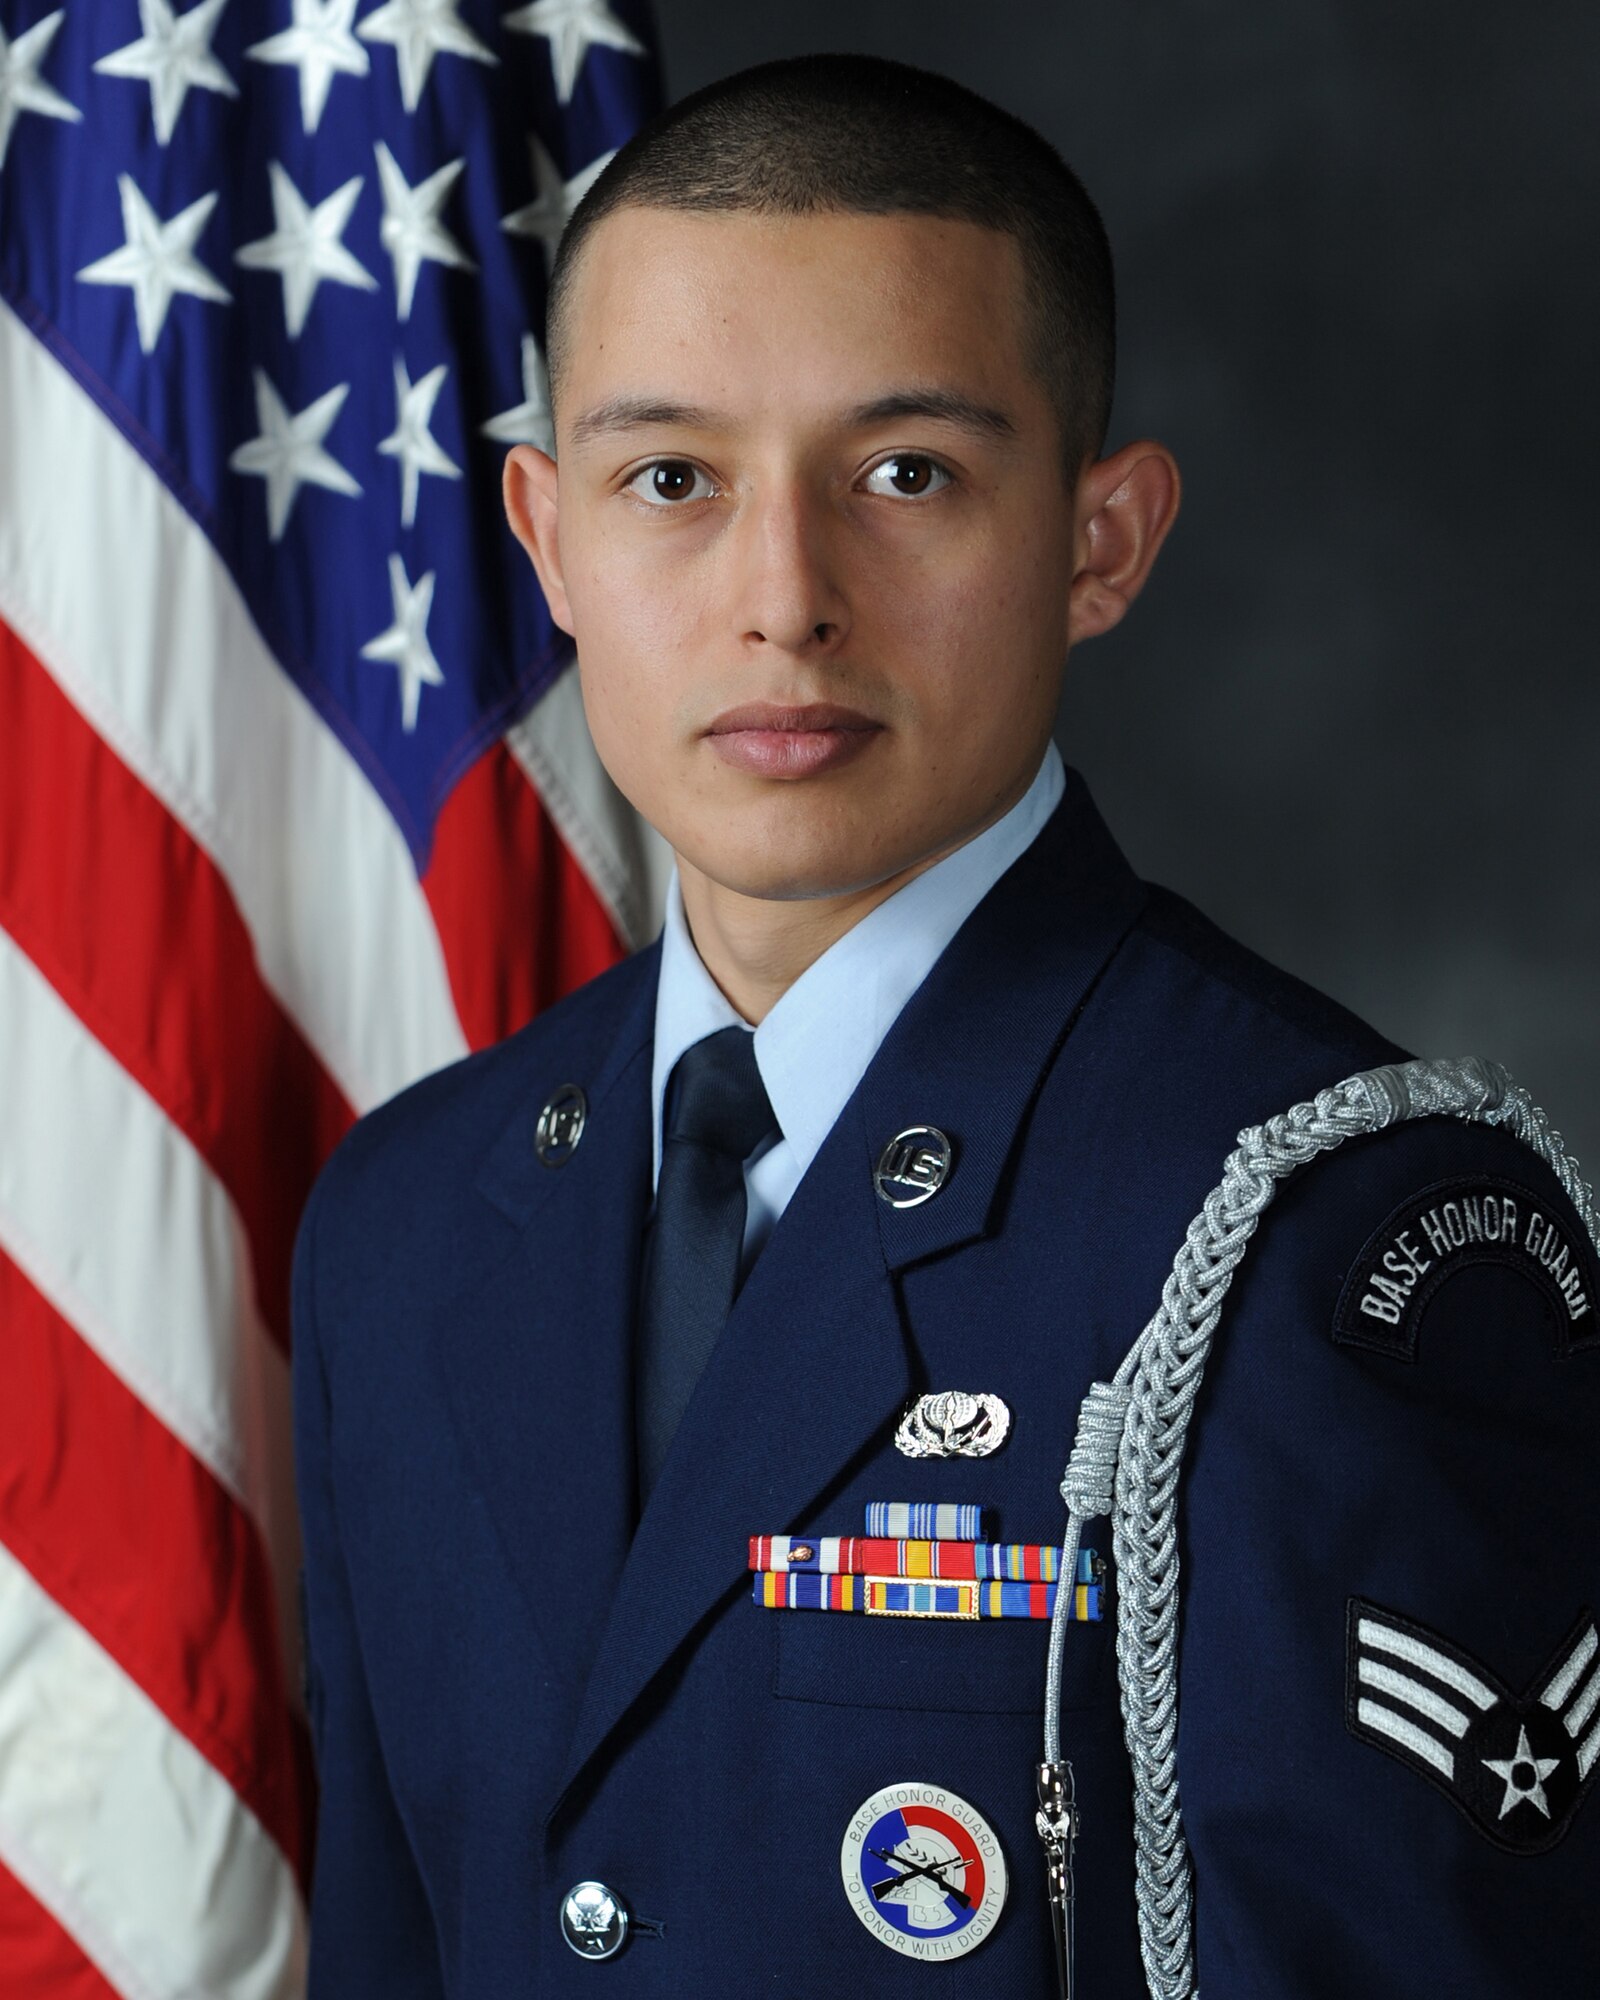 OFFUTT AIR FORCE BASE, Neb. -- Senior Airman Luis P. Vargas, from Mountain Home AFB, Idaho, is one of 29 Airmen nominated for awards who will attend the 2010 Air Combat Command Outstanding Airmen of the Year Awards Banquet in Omaha, Neb., April 21. Airman Vargas is nominated for the Outstanding Honor Guard Member of the Year Award. U.S. Air Force courtesy photo